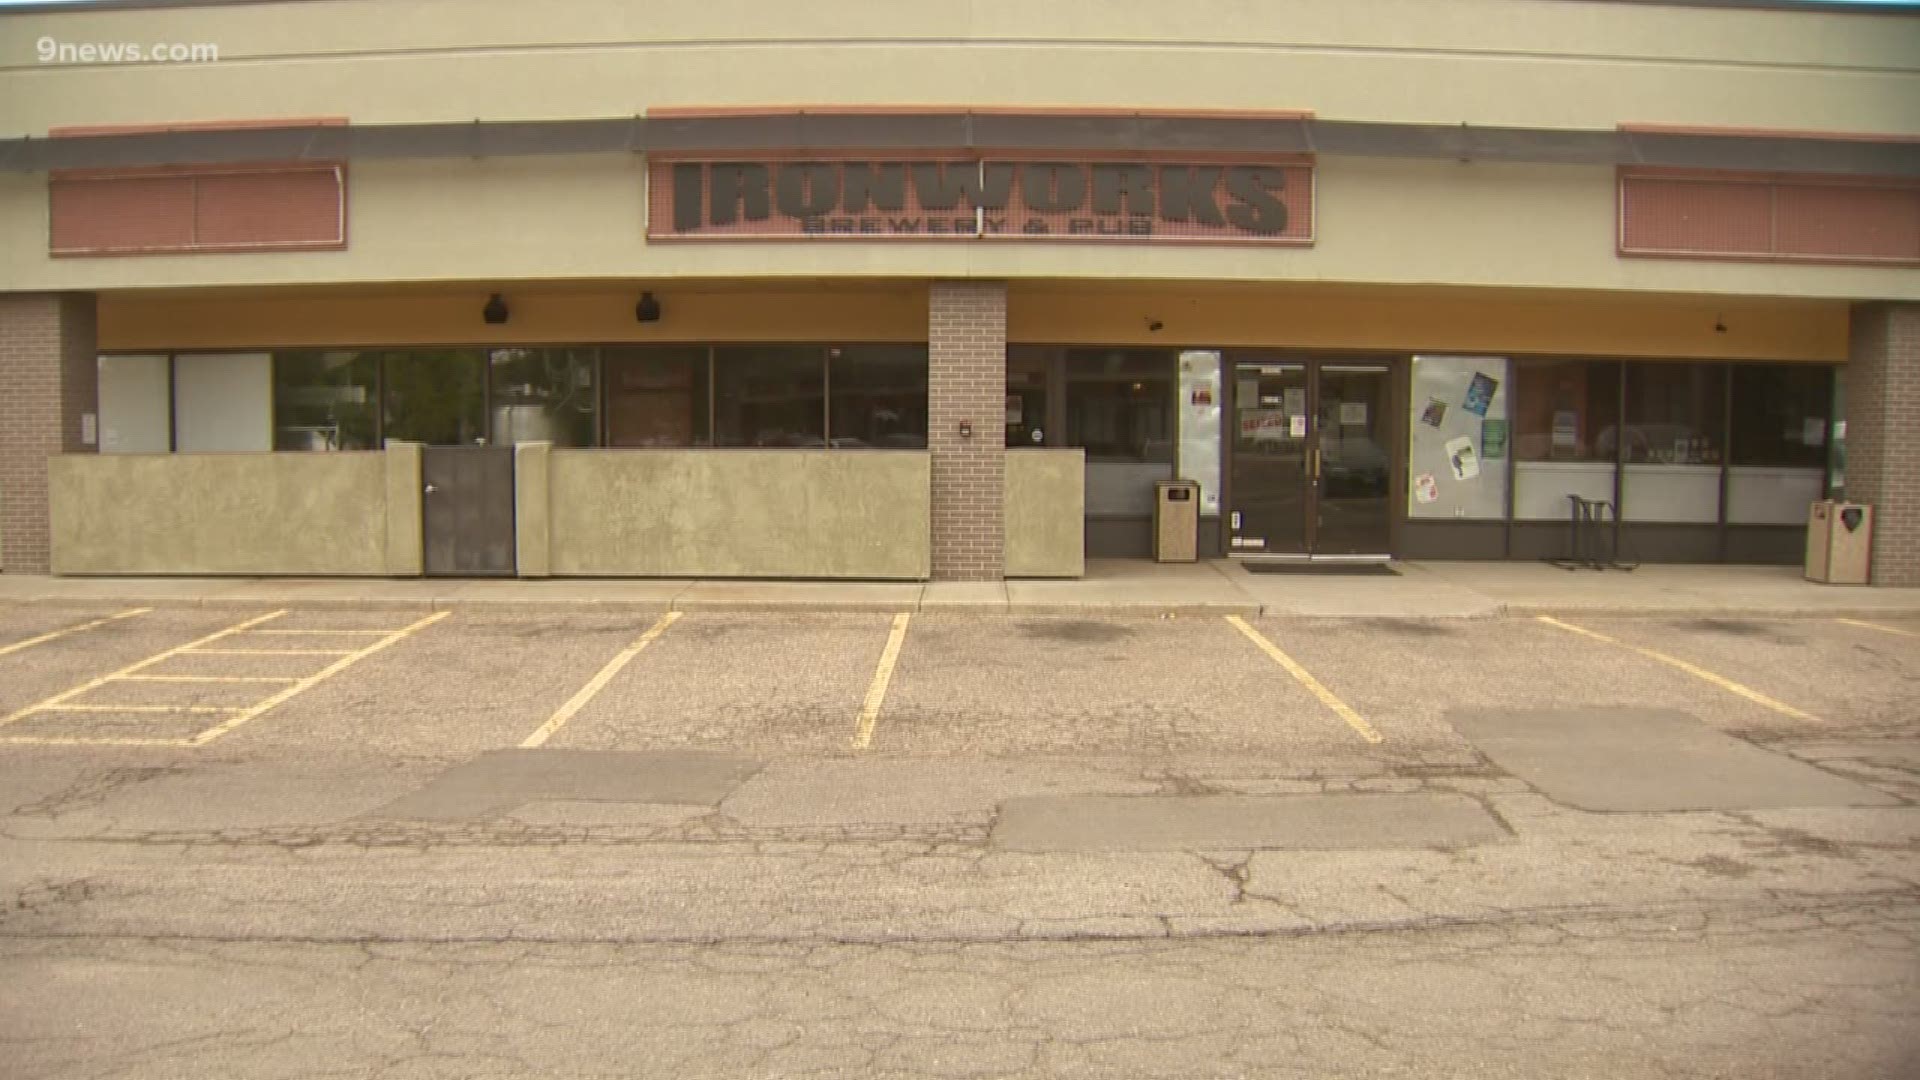 Ironworks owes $15,409 in taxes and fees, according to a seizure notice posted to the building.